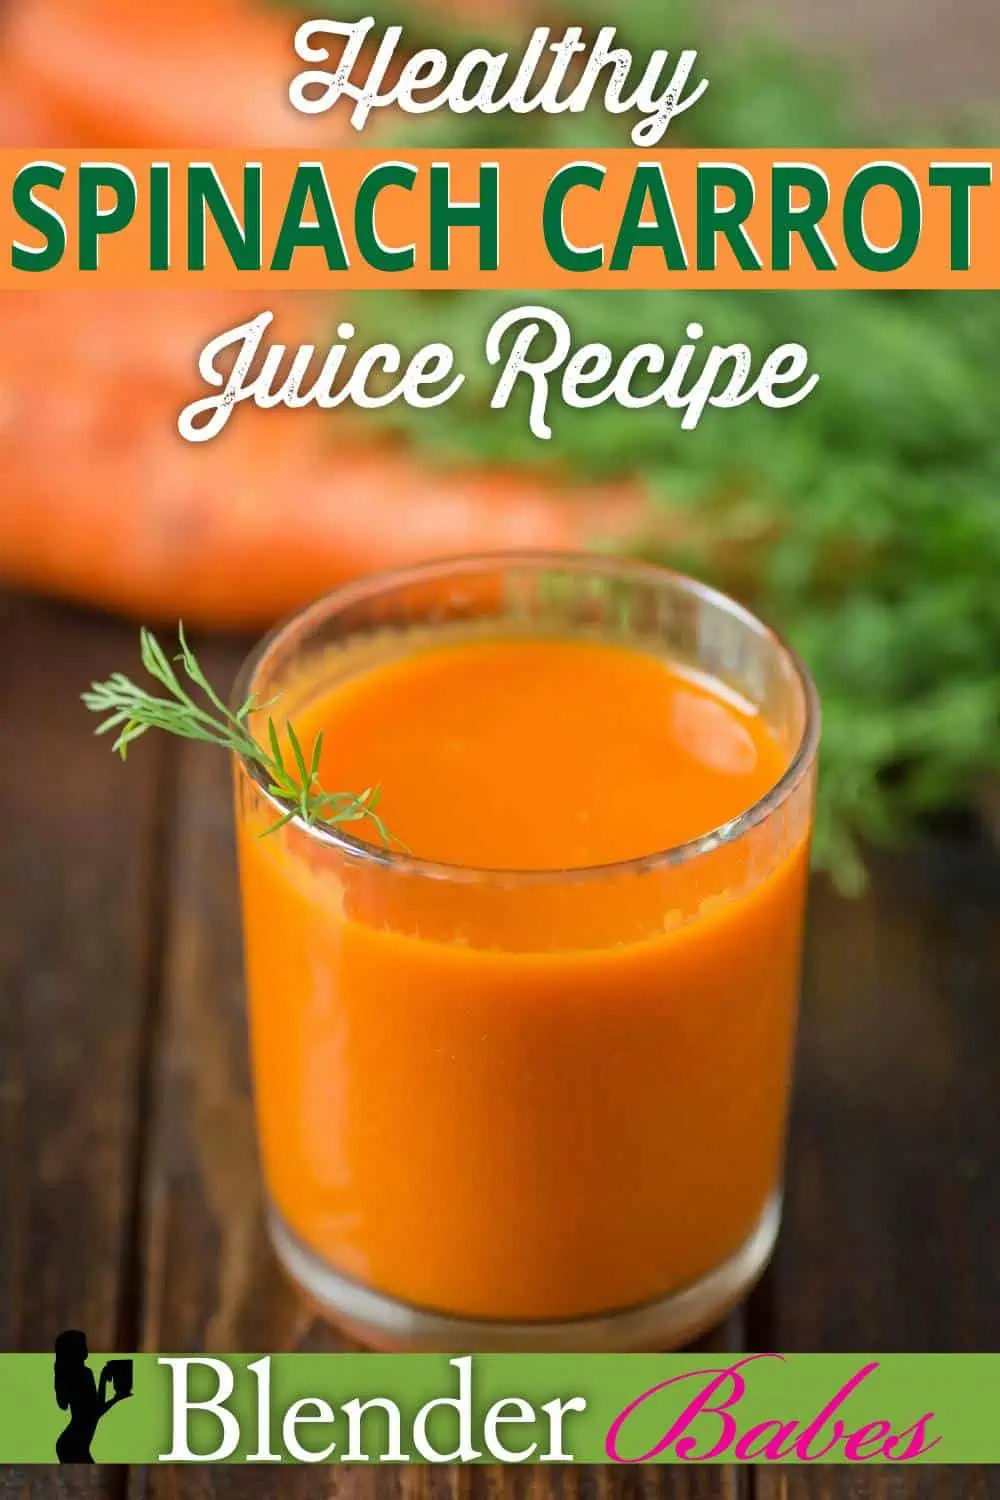 https://www.blenderbabes.com/wp-content/uploads/Healthy-Spinach-Carrot-Juice-Recipe.webp